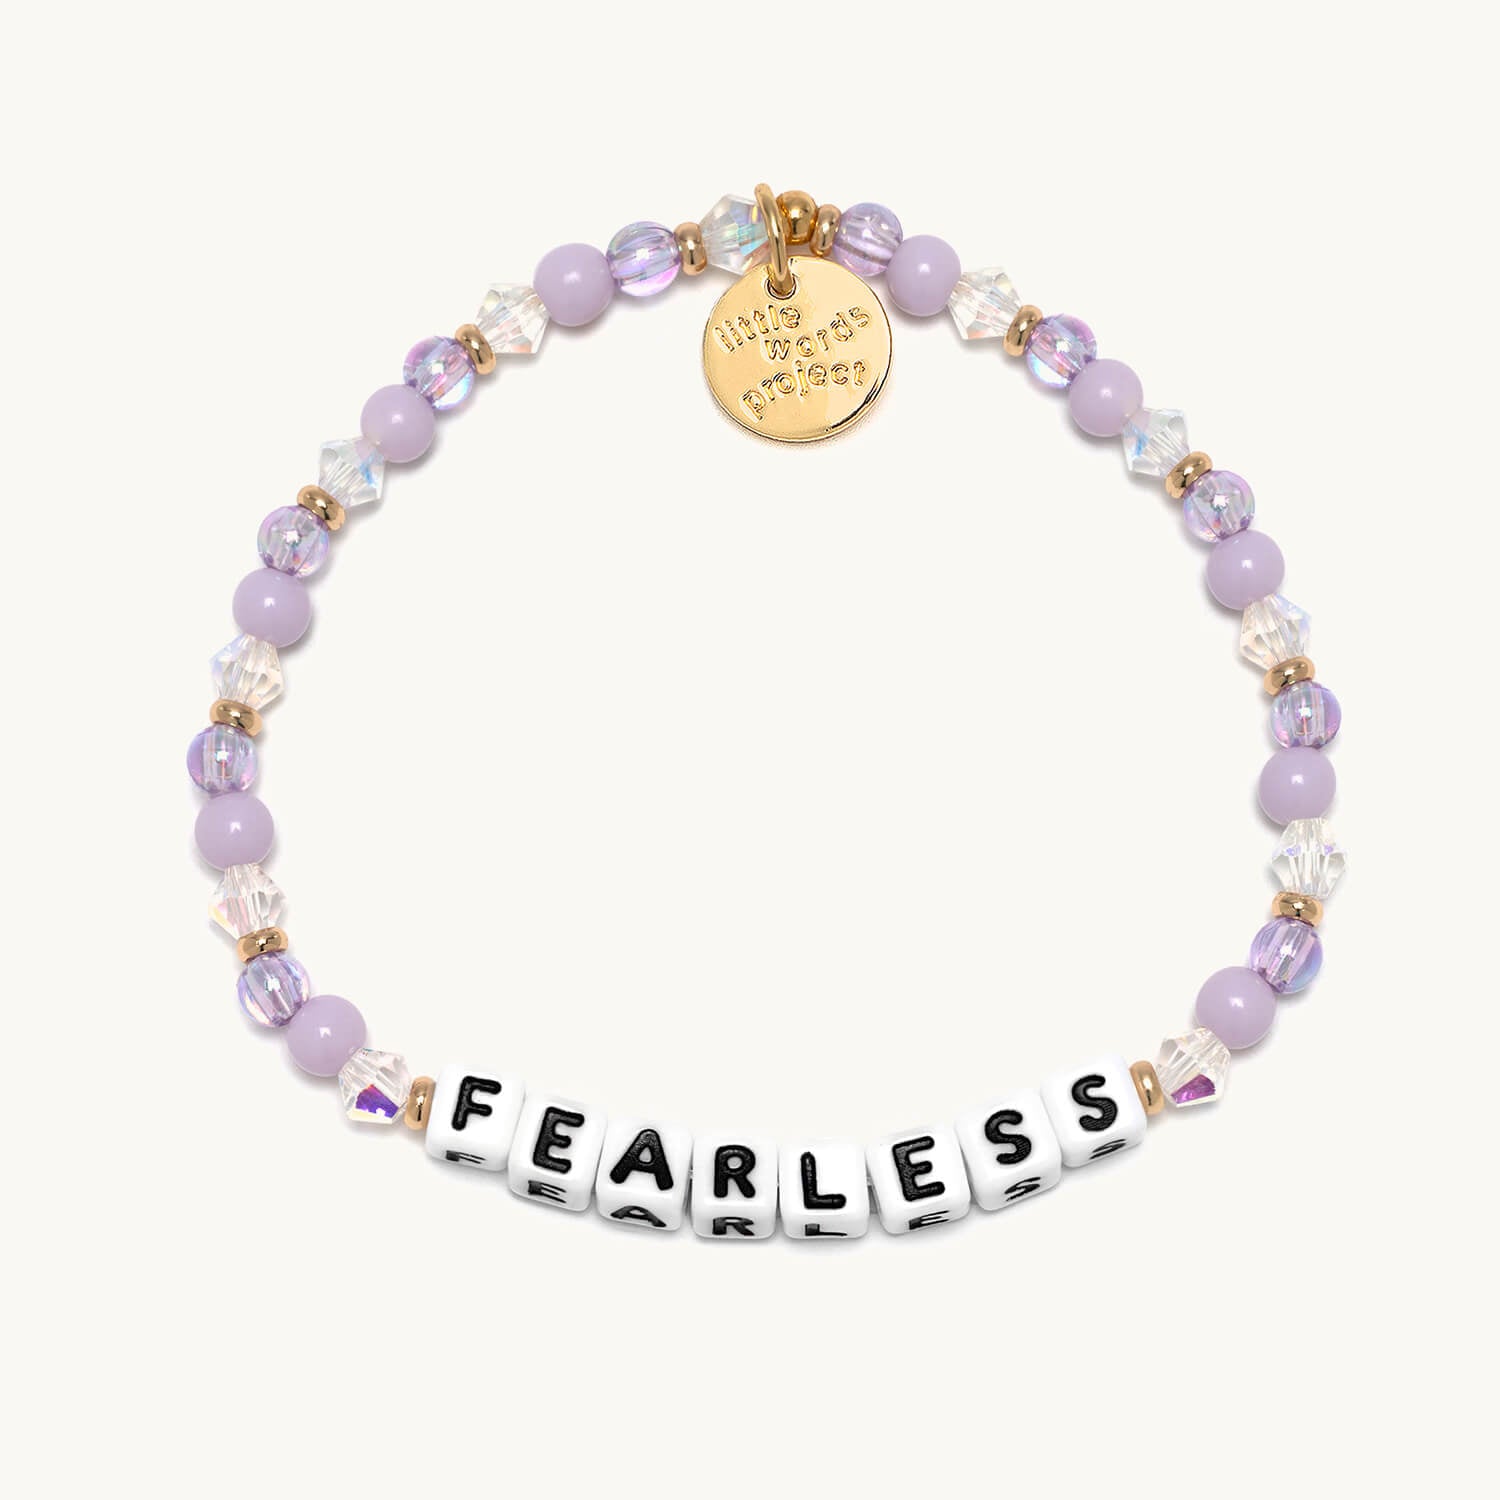 Fearless – Little Words Project